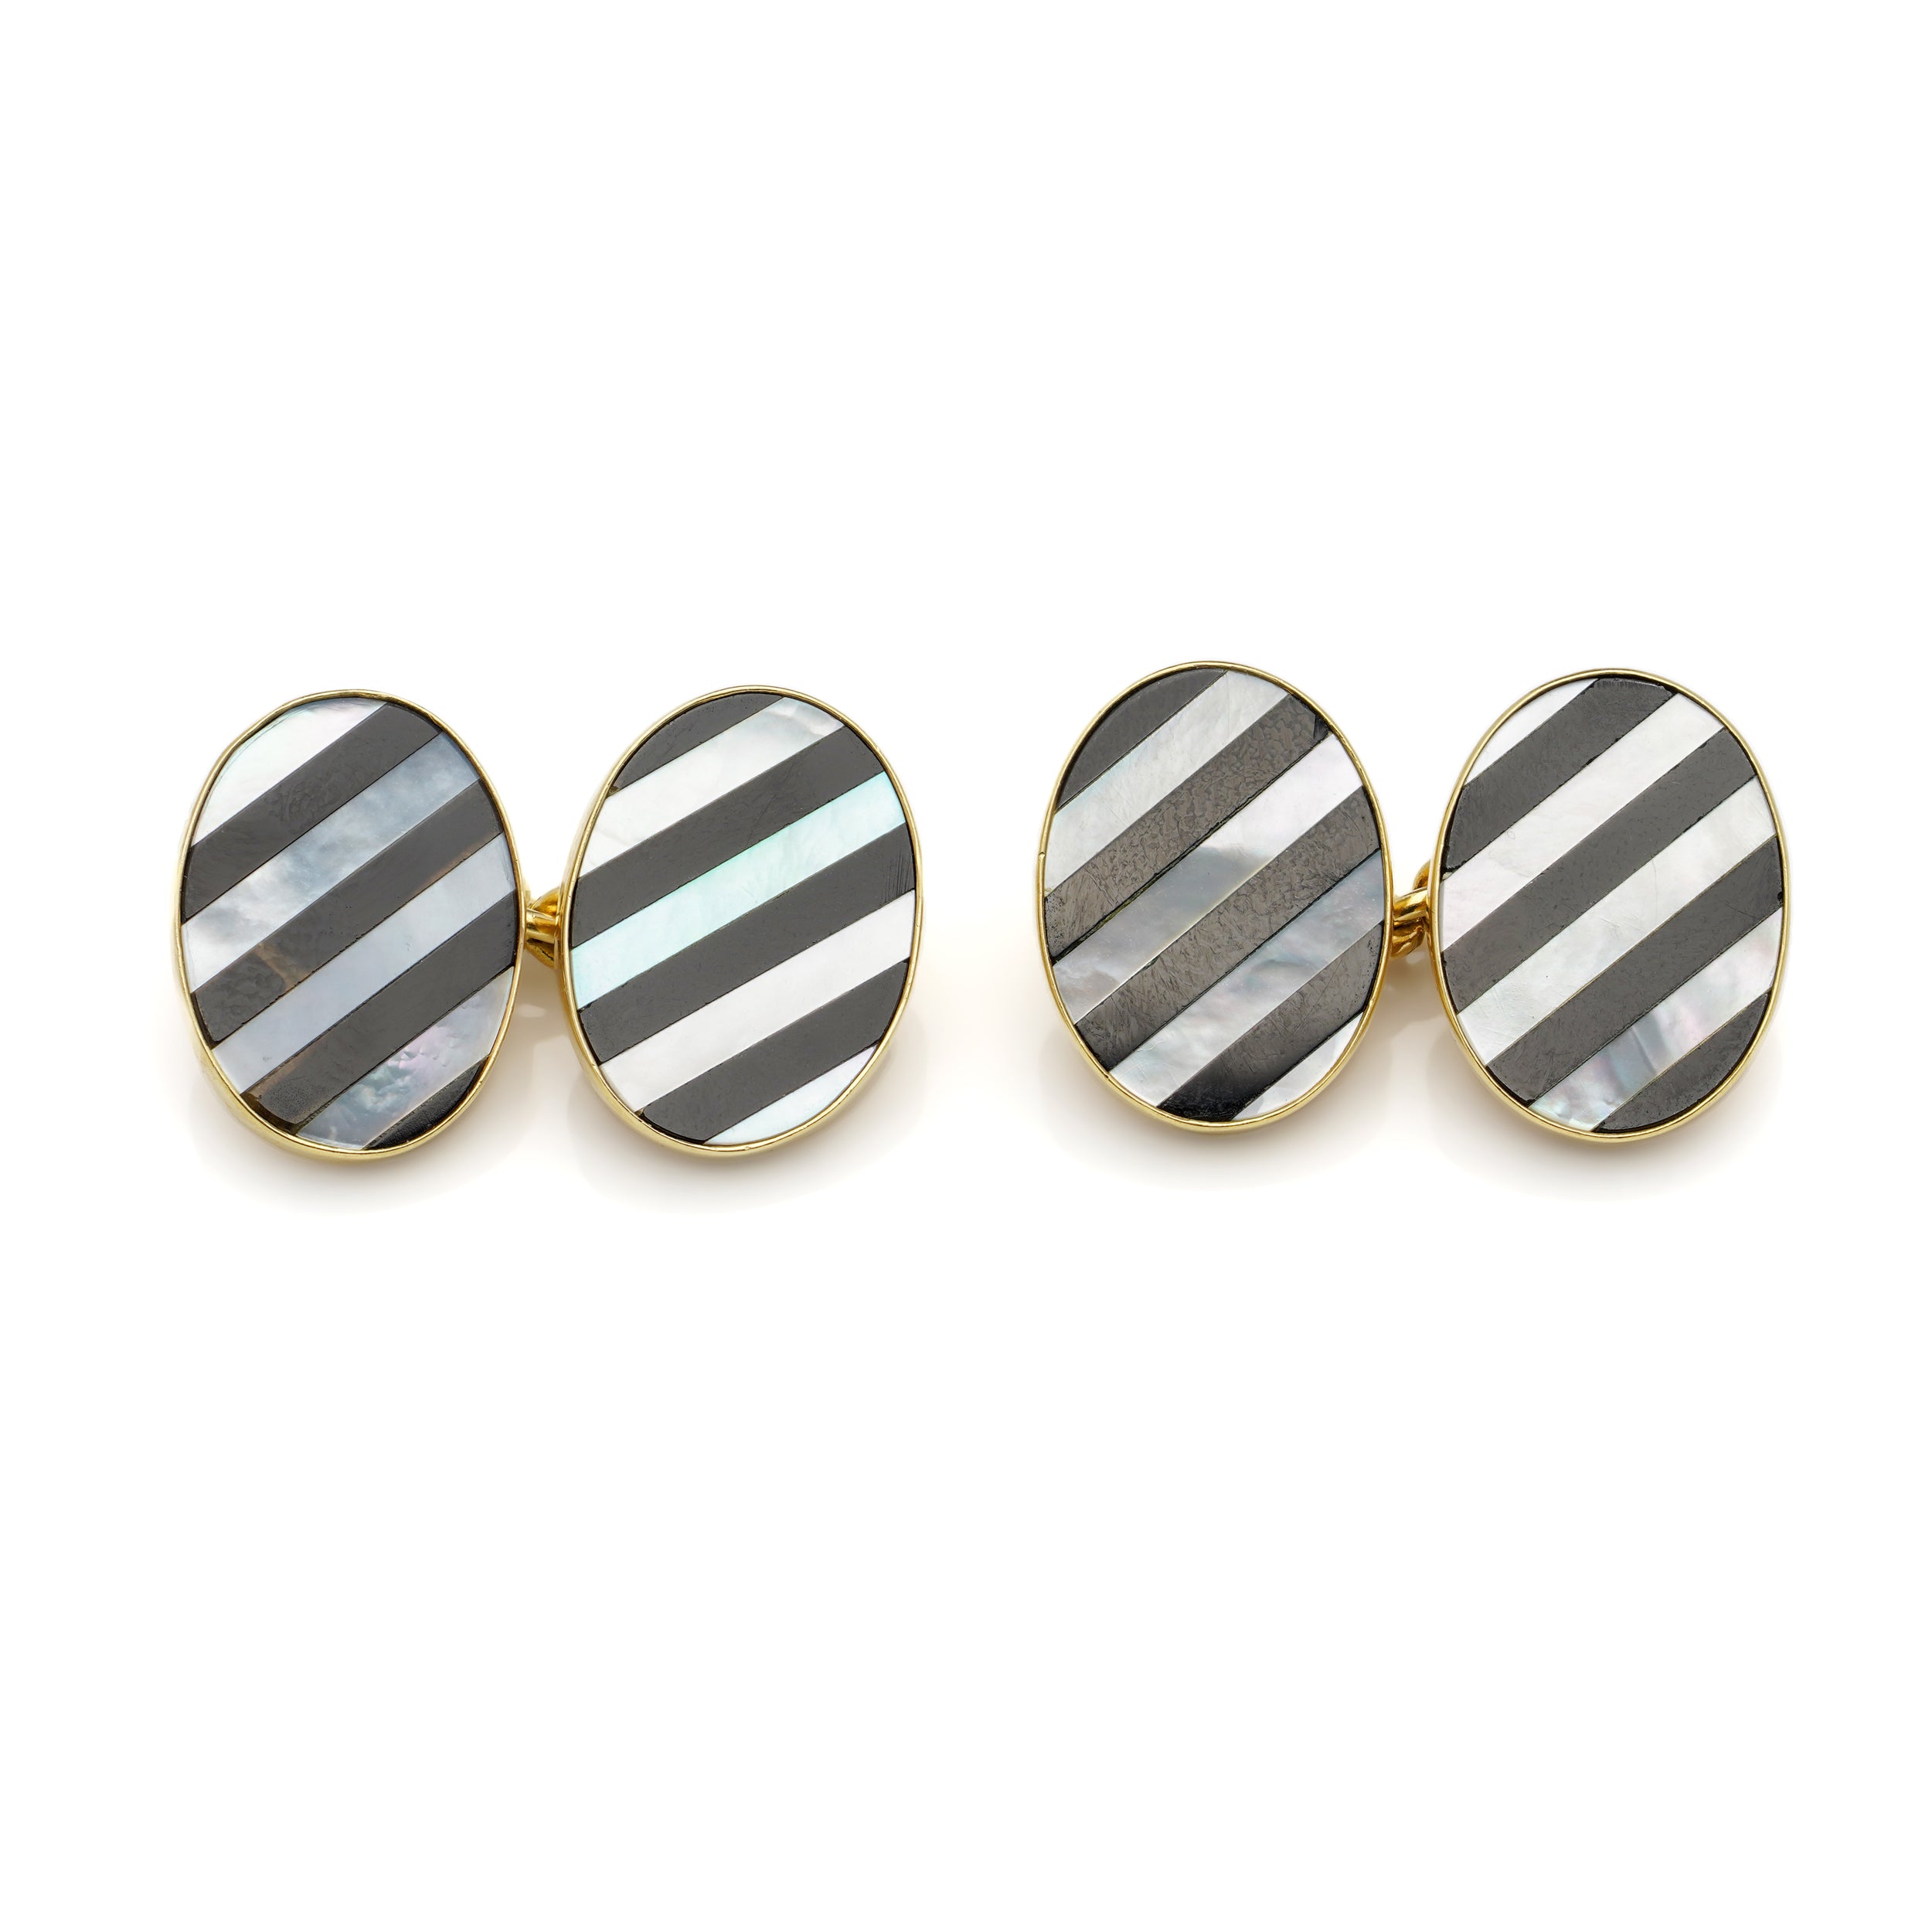 18ct Gold Onyx & Mother of Pearl Cufflinks by Deakin & Francis - Wildsmith Jewellery